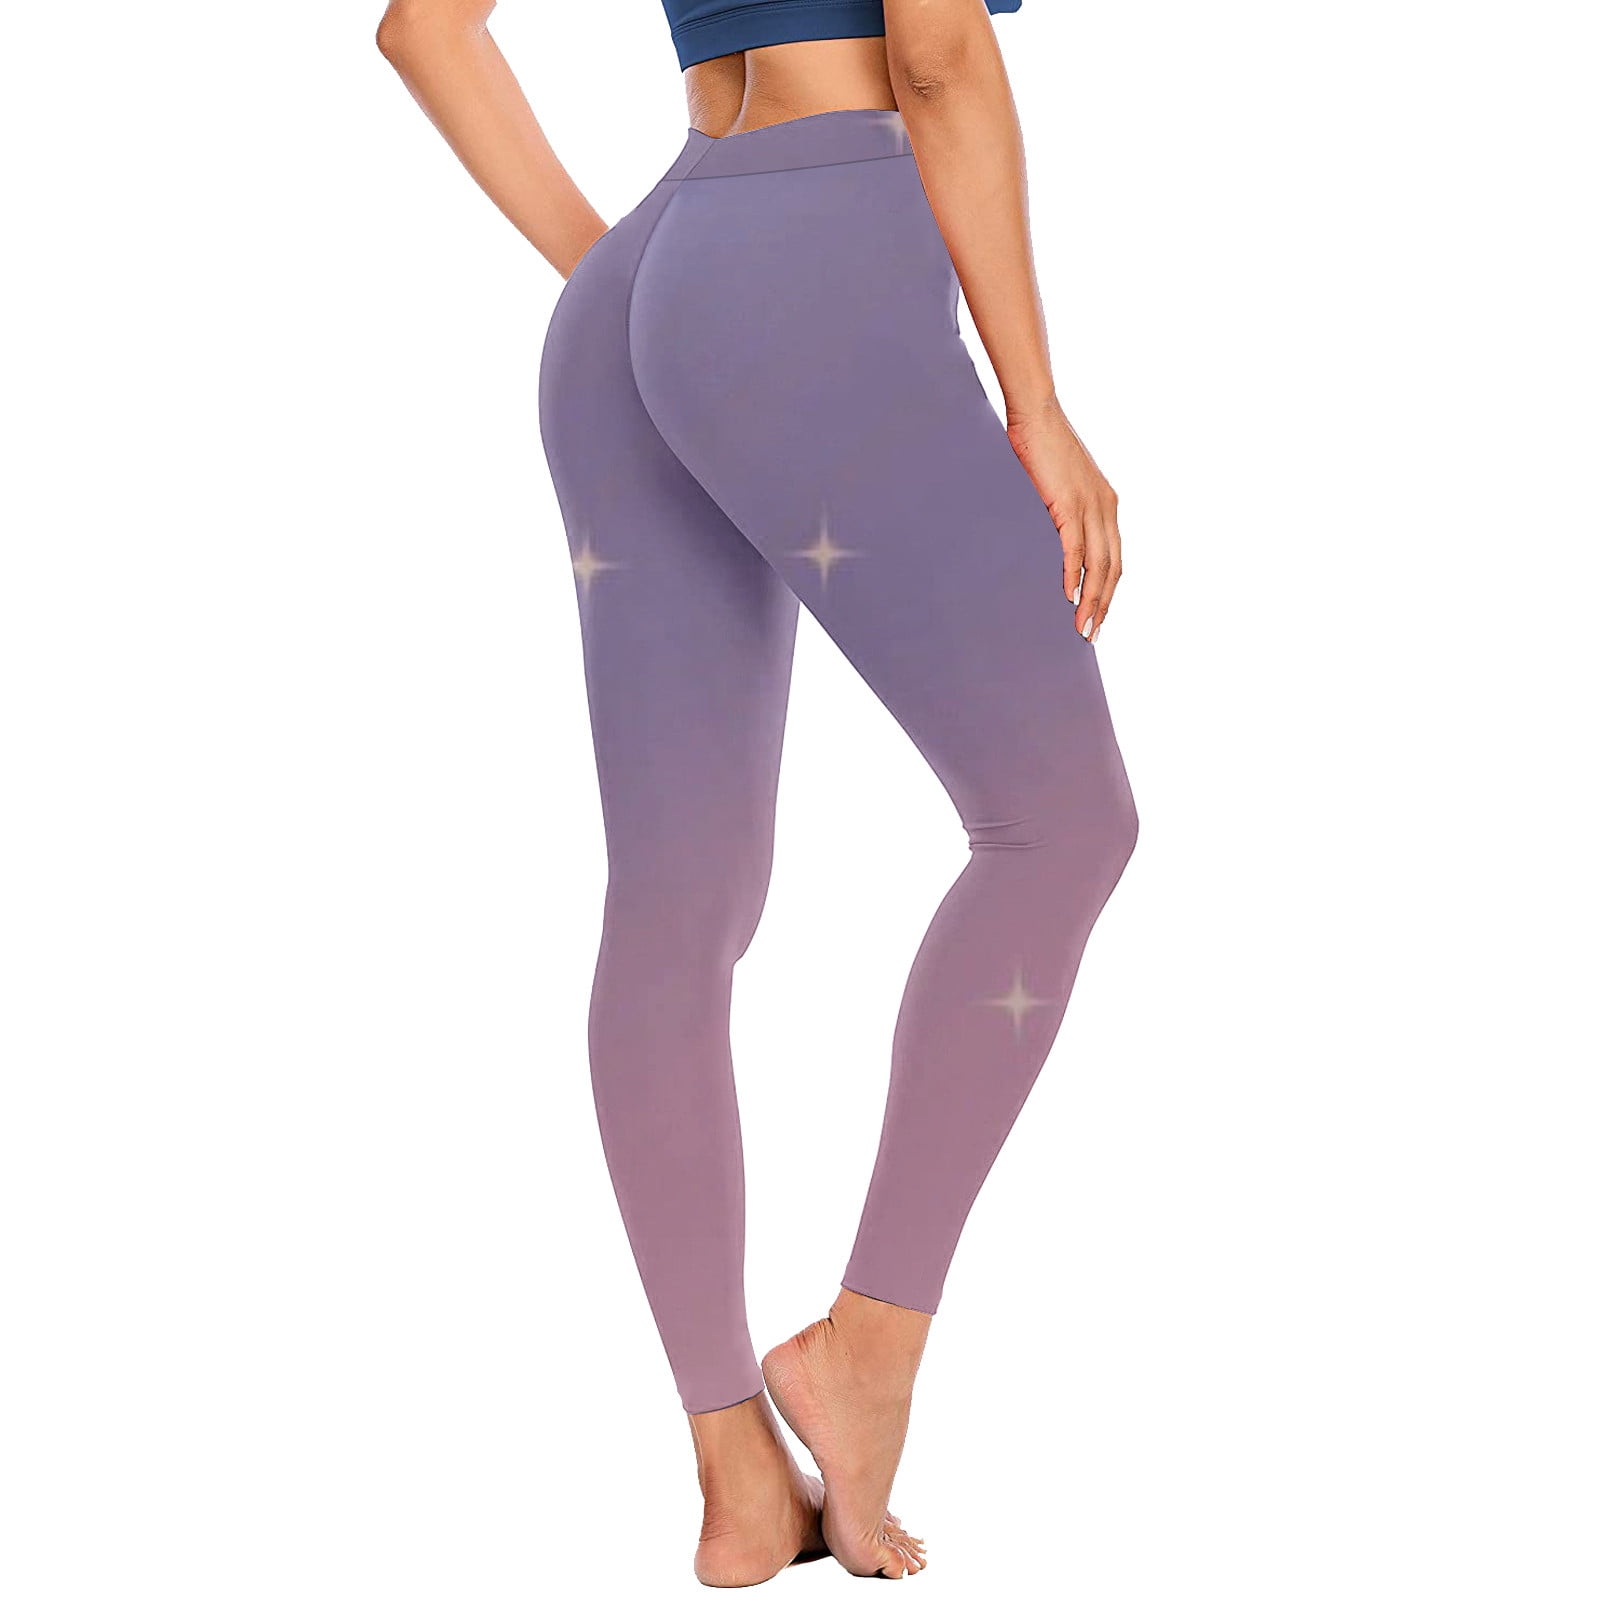 YWDJ Tights for Women Workout Butt Lifting Gym Long Length High